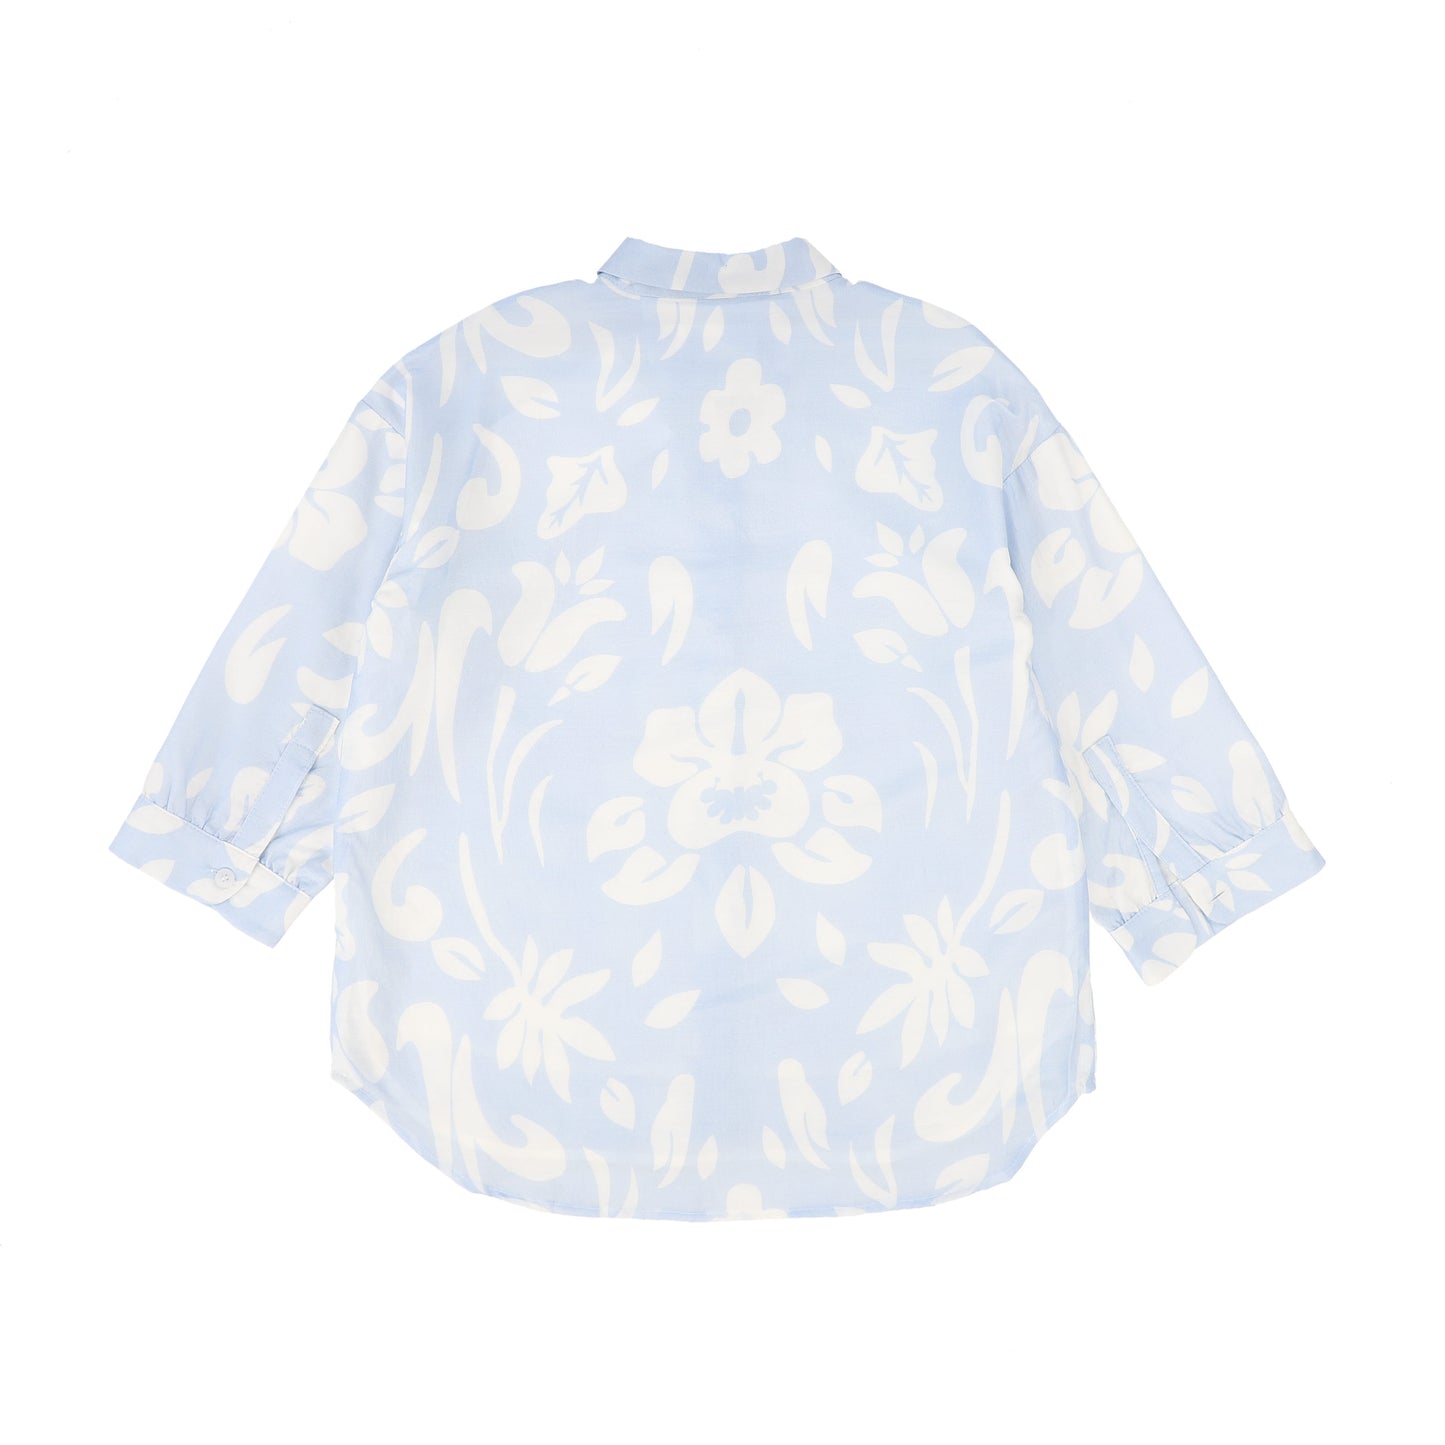 BAMBOO BLUE FLORAL PRINTED BLOUSE